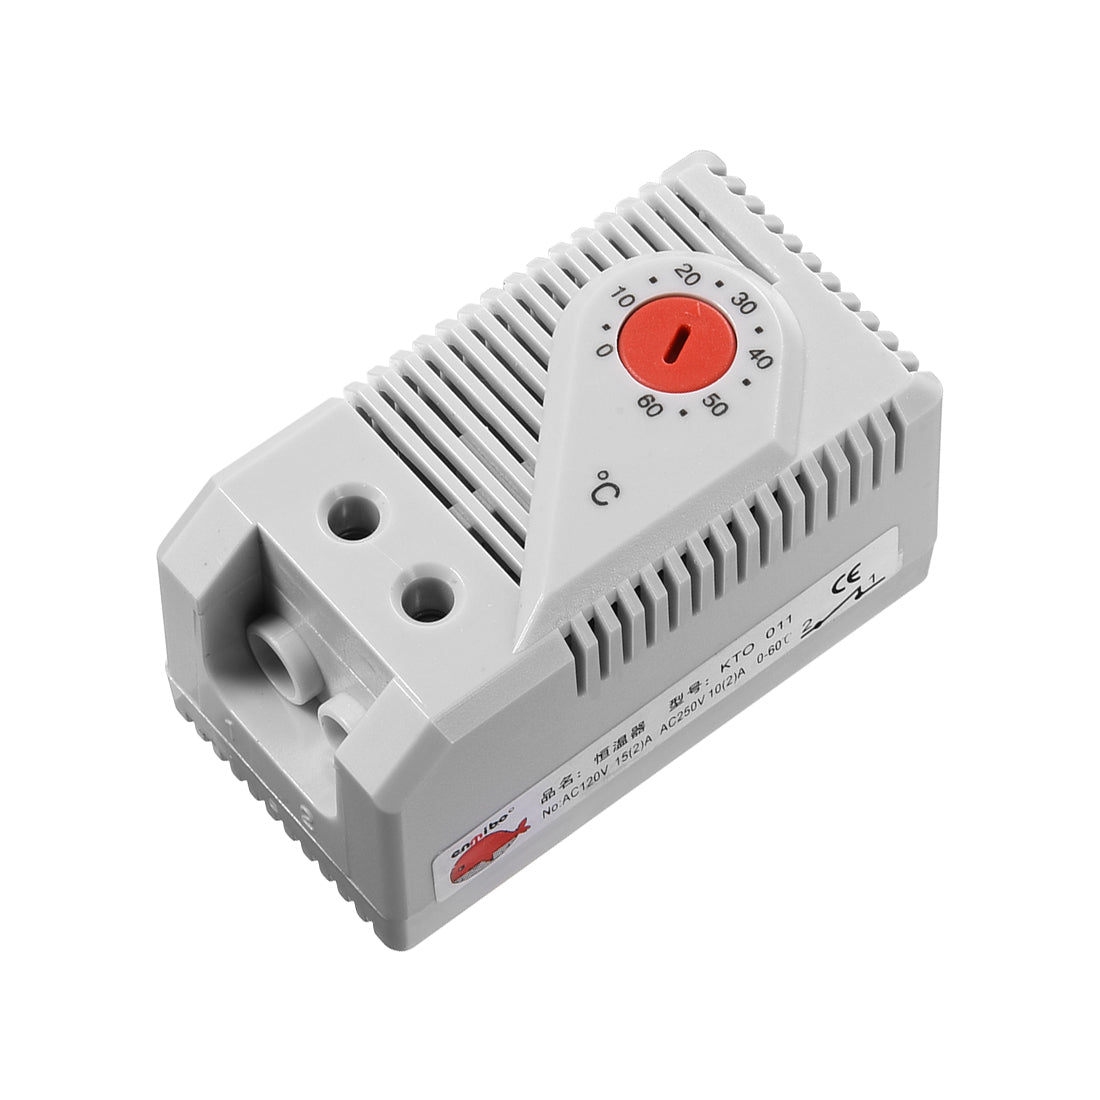 uxcell Uxcell Mechanical Thermostat, KTO011 0-60℃ Adjustable Compact Normally Close(N.C) Temperature Controller Switch